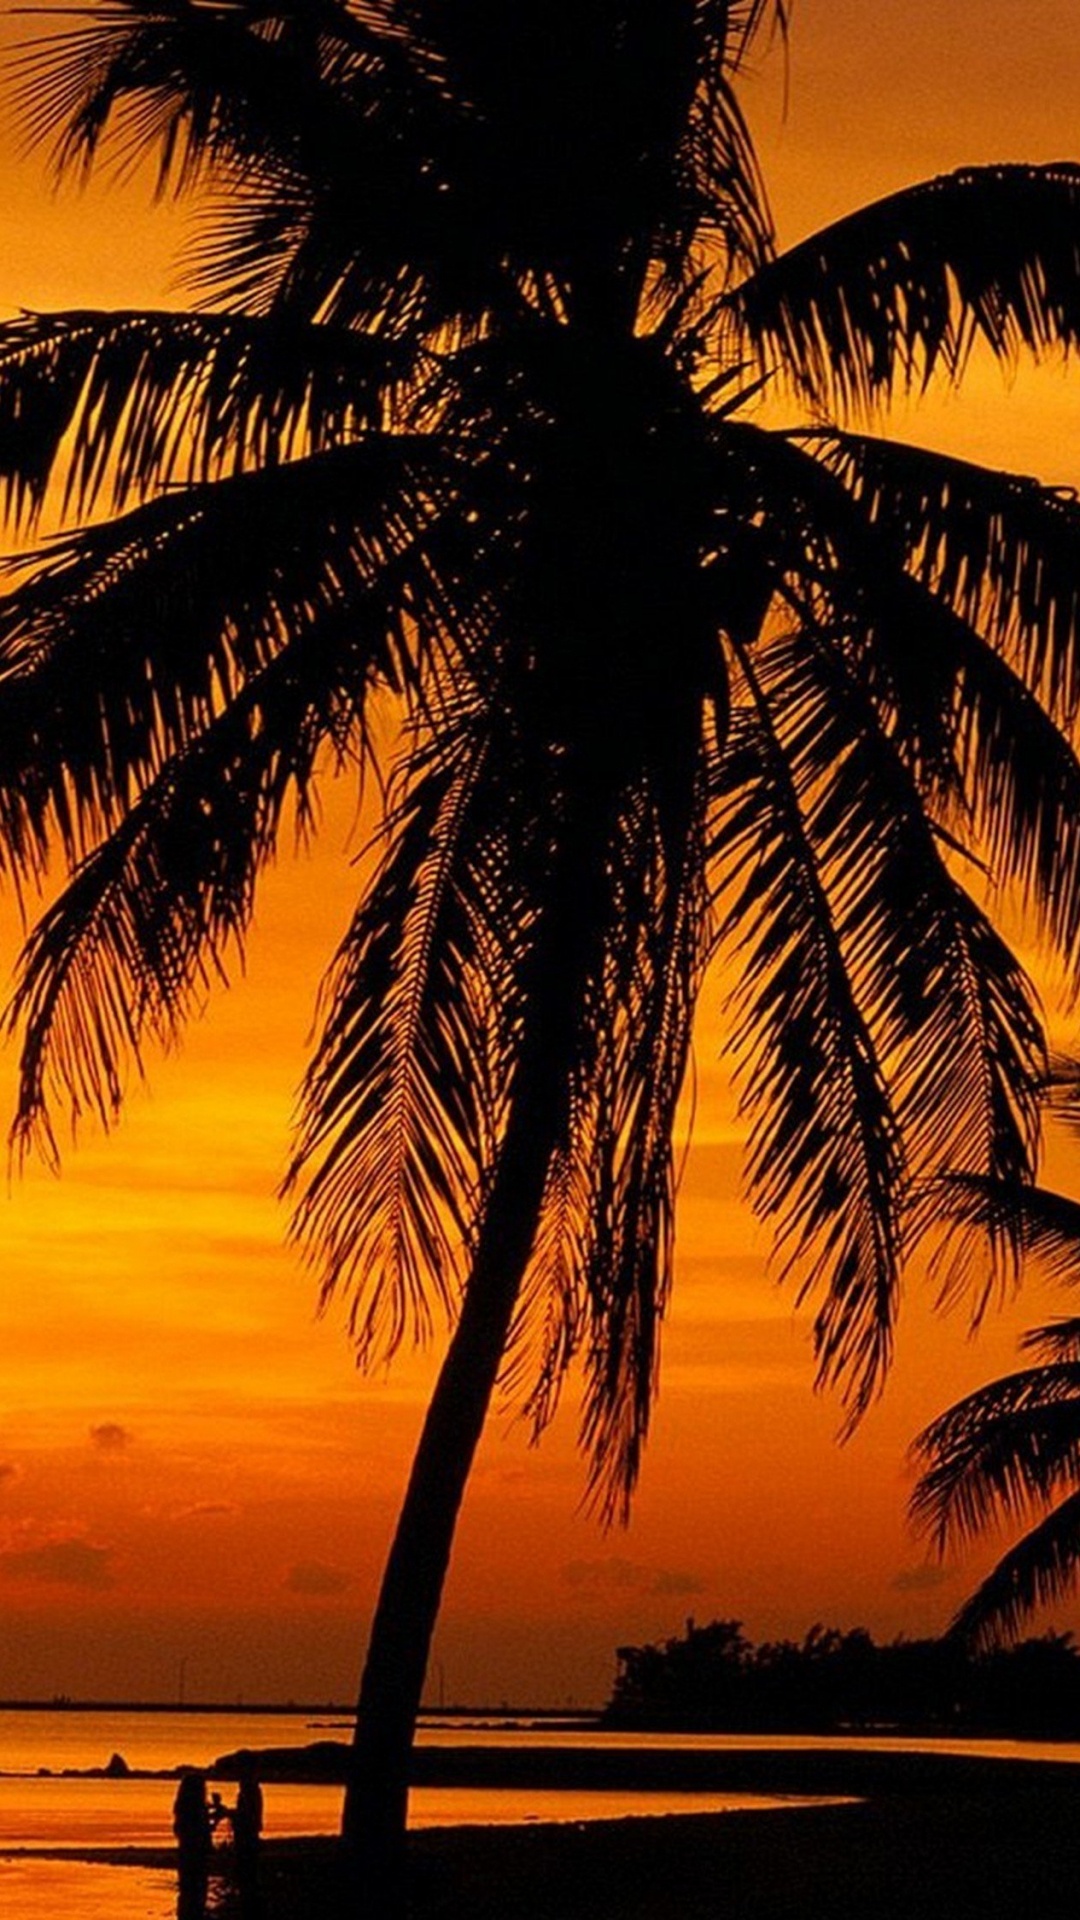 Silhouette of Palm Tree Near Body of Water During Sunset. Wallpaper in 1080x1920 Resolution